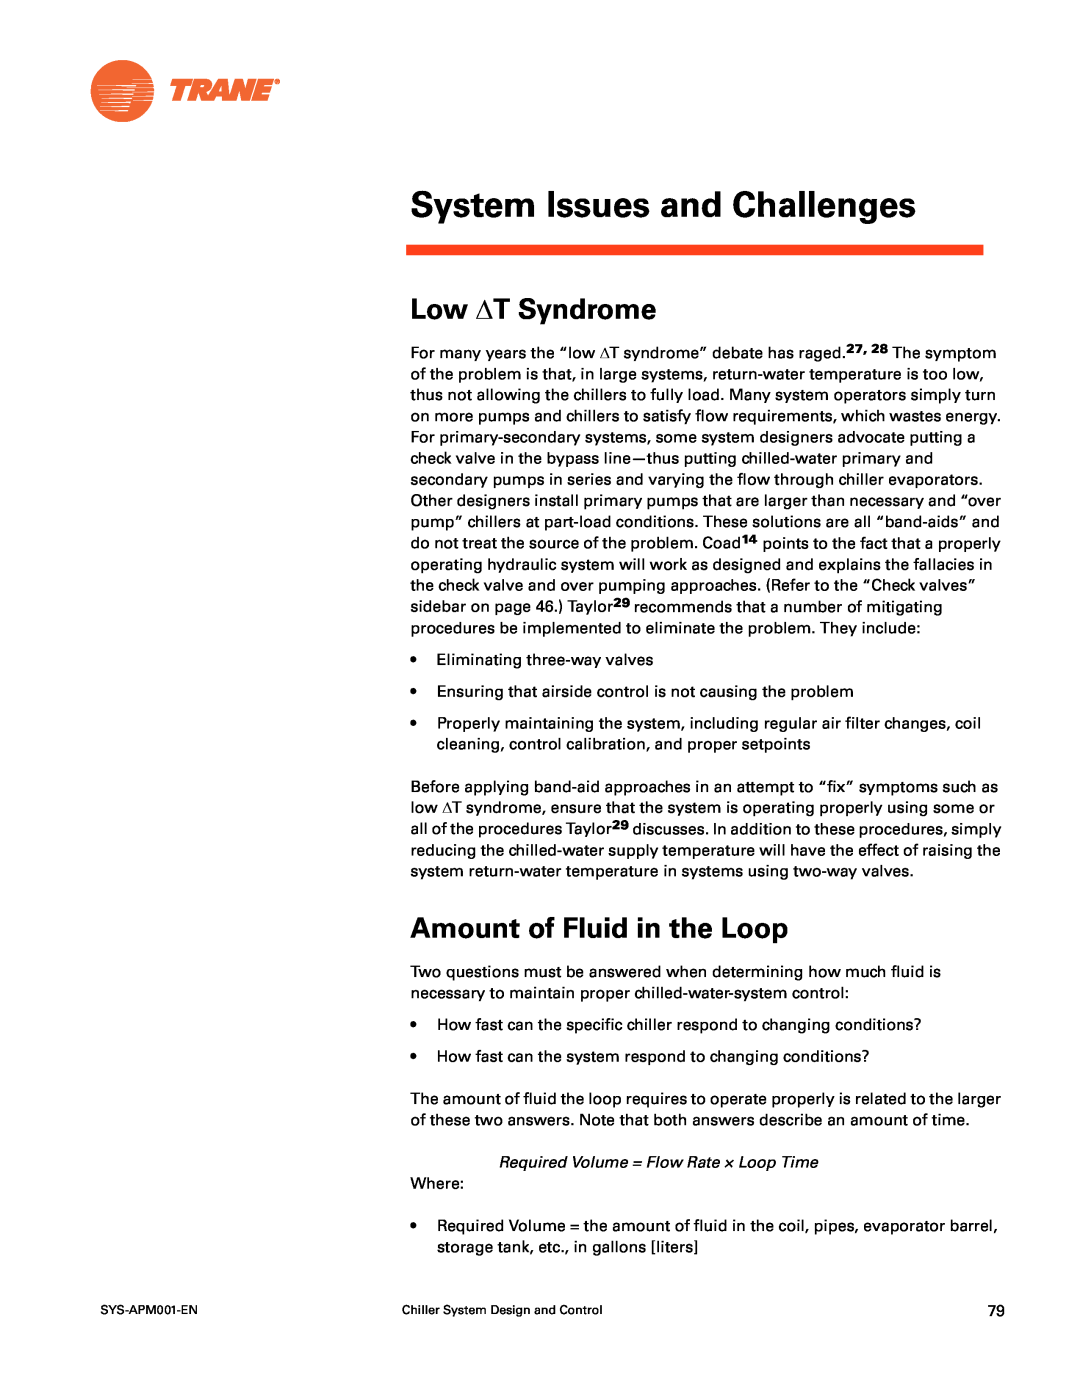 Trane SYS-APM001-EN manual System Issues and Challenges, Low ΔT Syndrome, Amount of Fluid in the Loop 